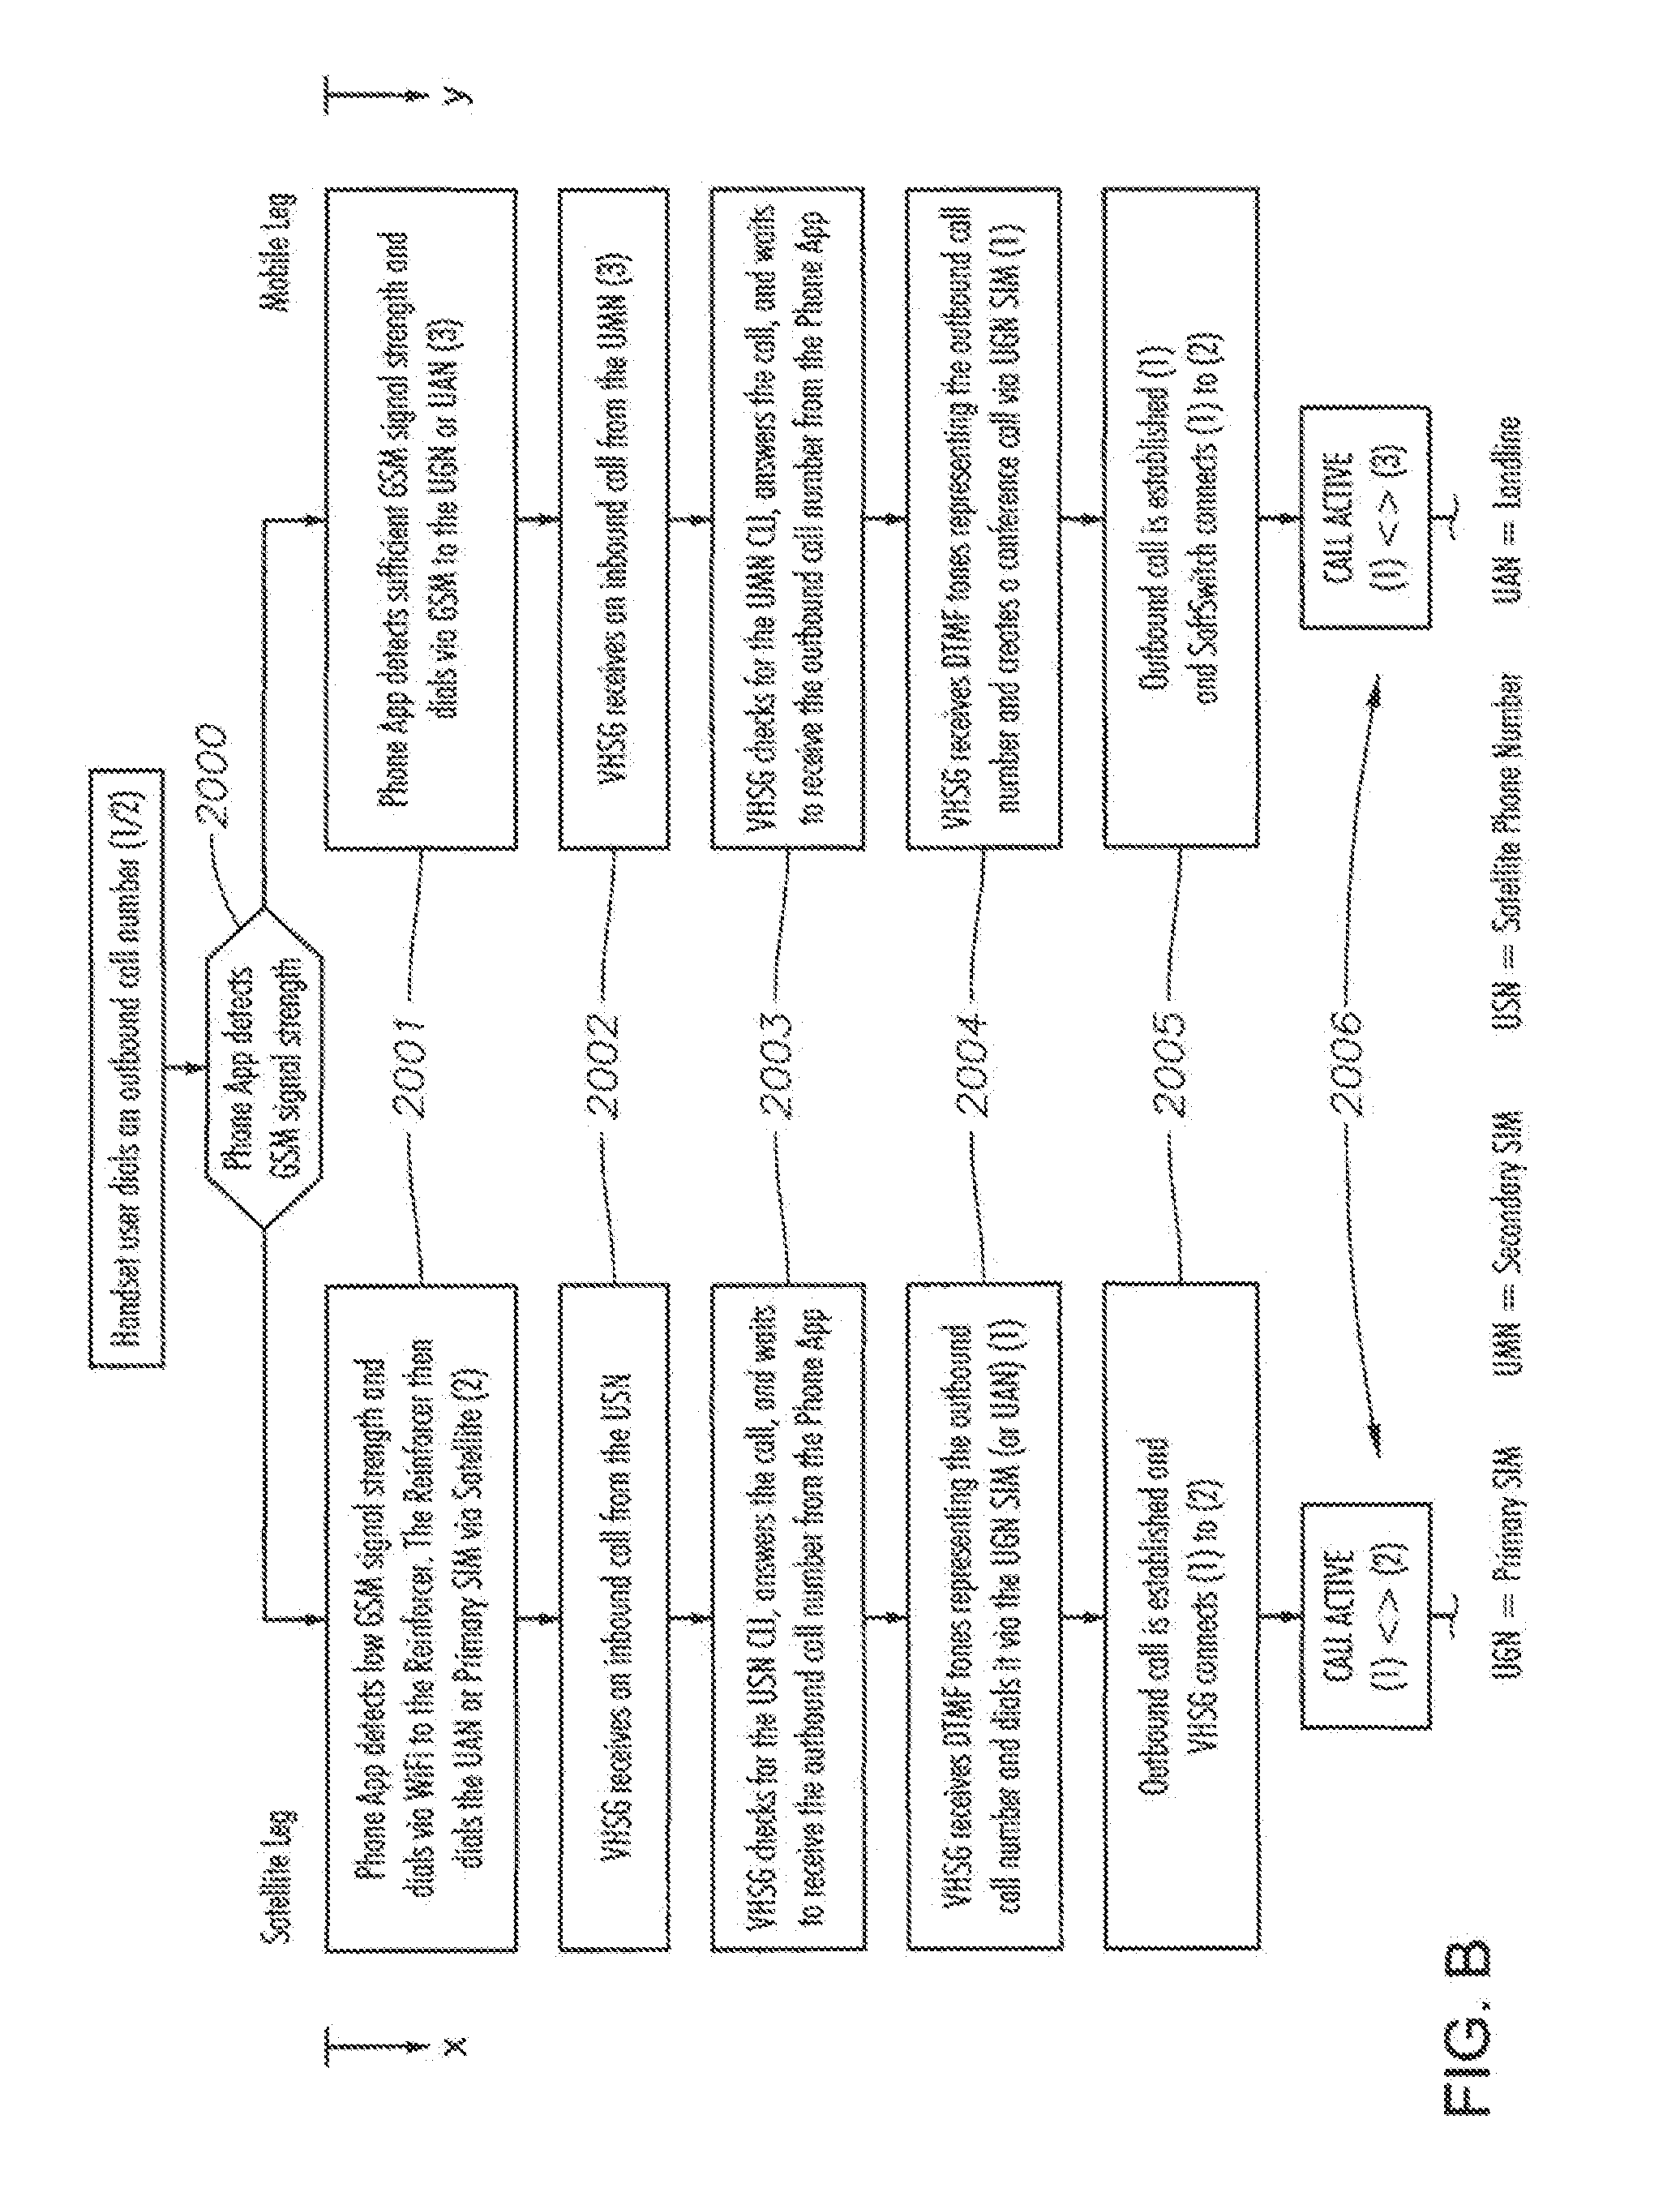 Apparatus, Method and System for Integrating Mobile and Satellite Phone Service